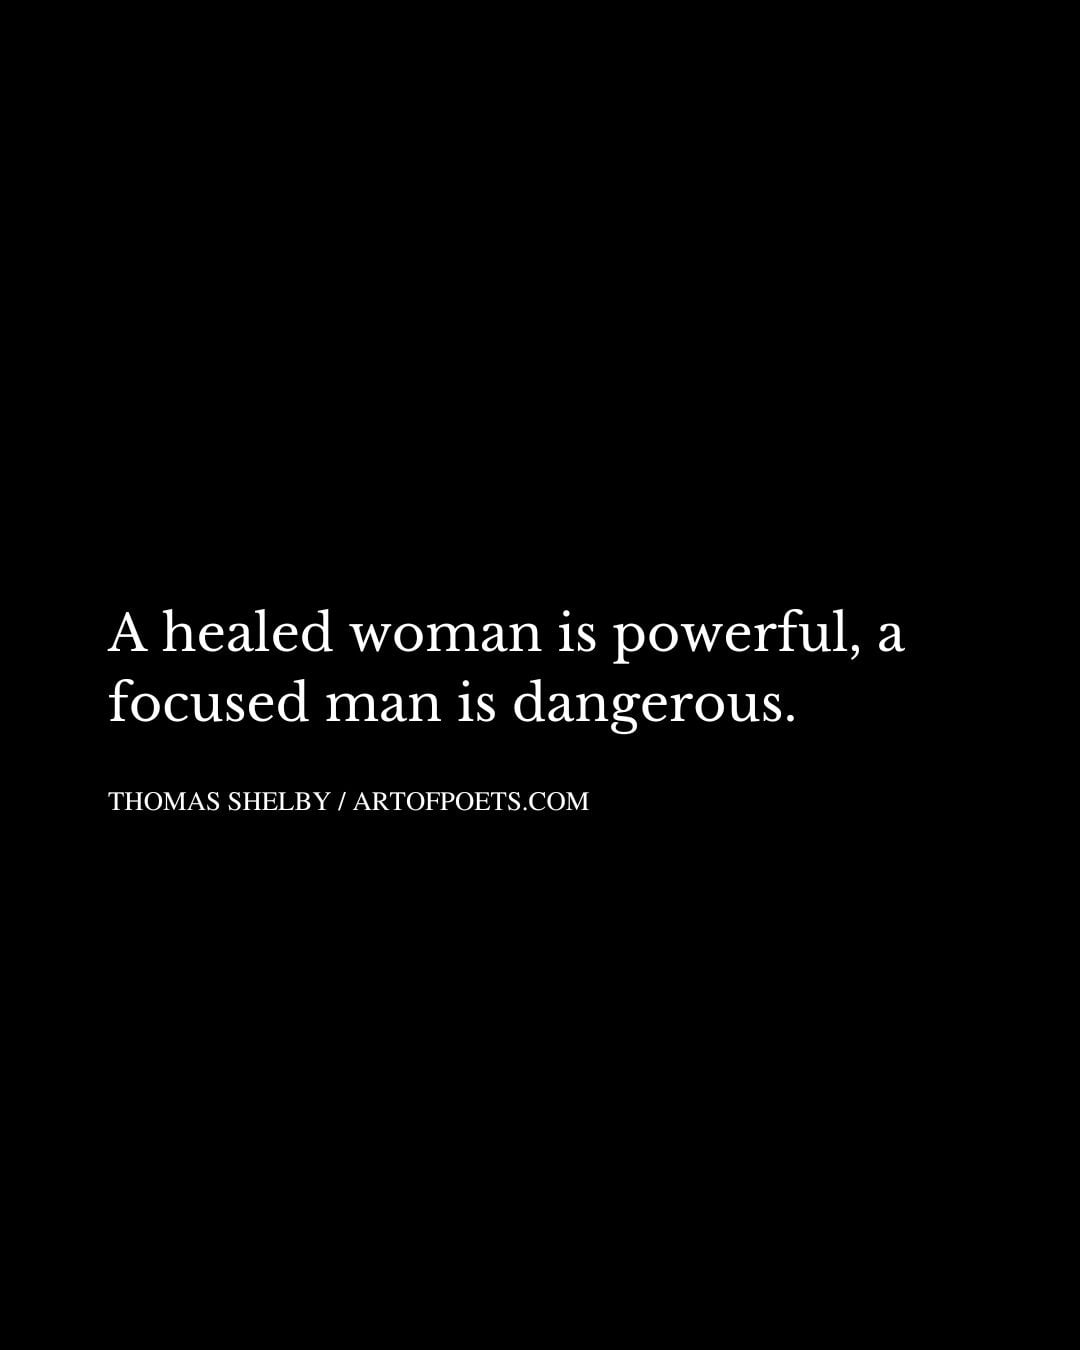 A healed woman is powerful a focused man is dangerous